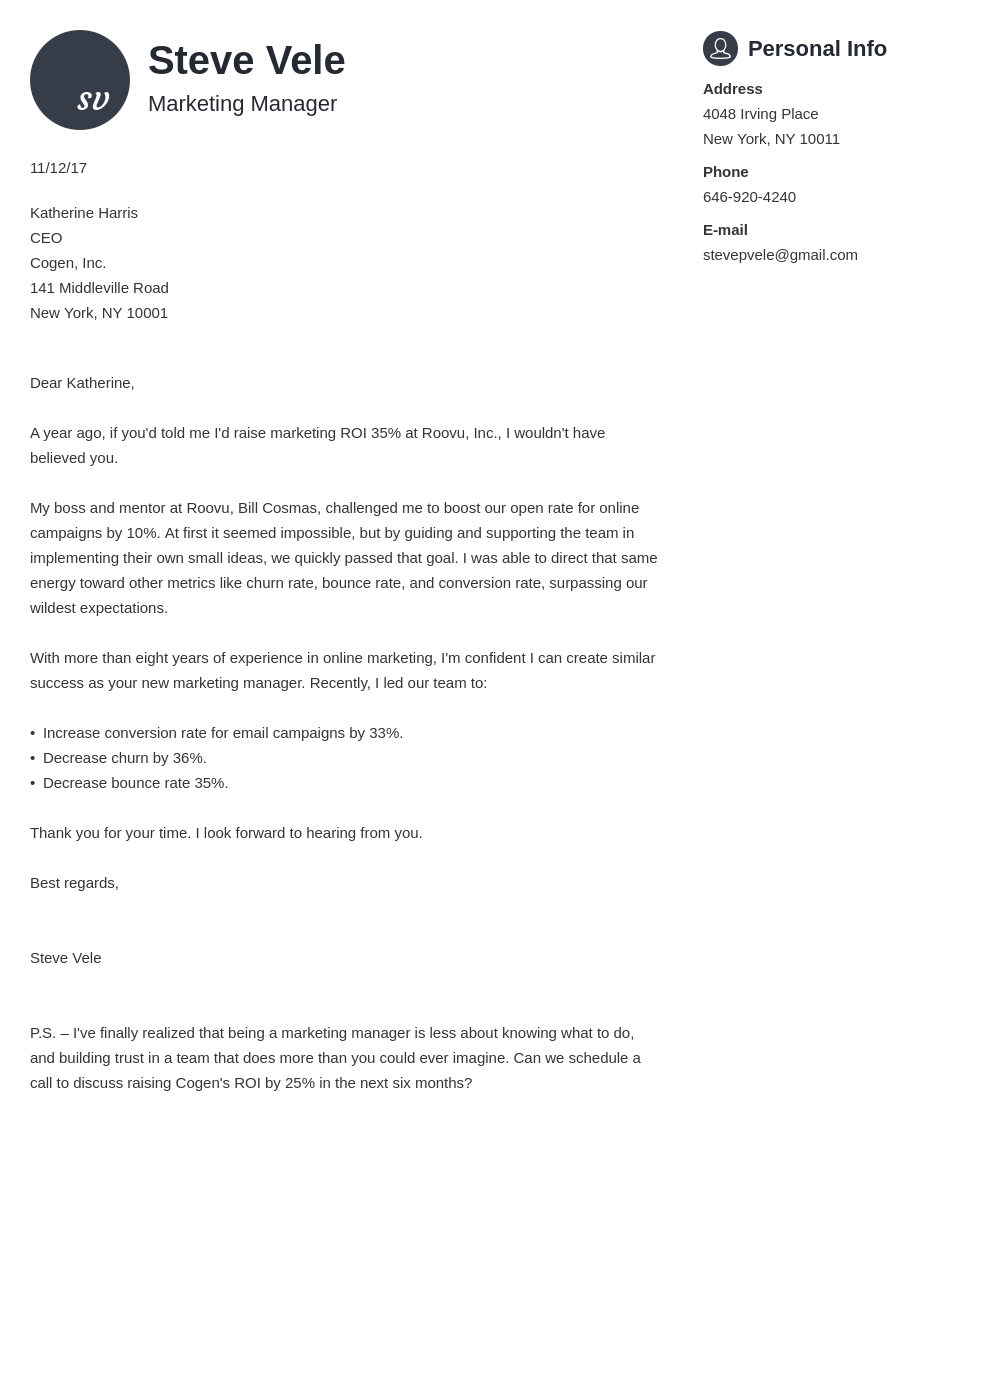 How to End a Cover Letter [14+ Closing Paragraph Examples]